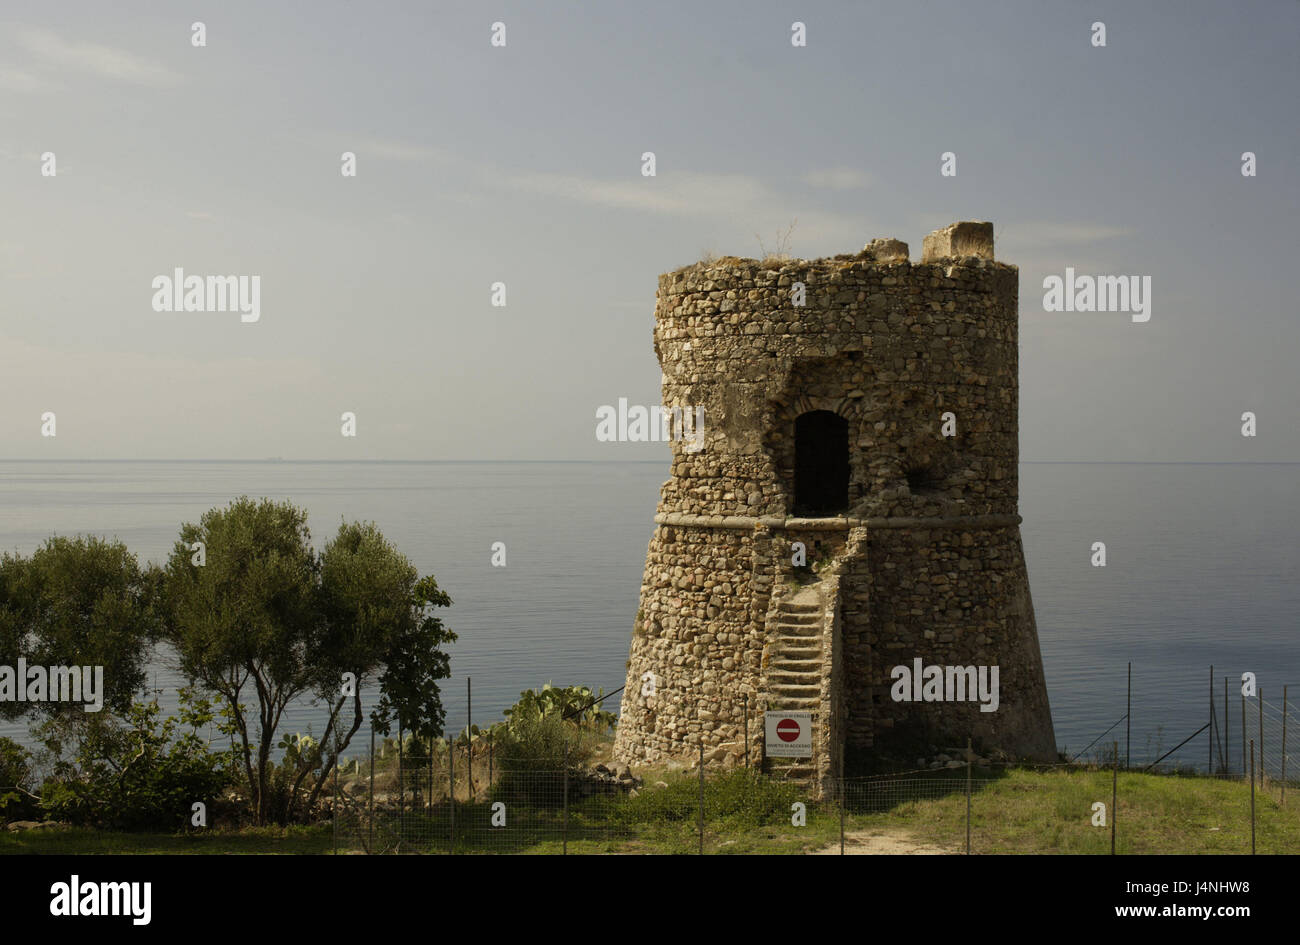 Italy, Calabria, Joppolo, Torre di Ippolito, Süditalien, coast, tower, watch-tower, tower ruin, ruin, remains, structure, place of interest, destination, tourism, Stock Photo